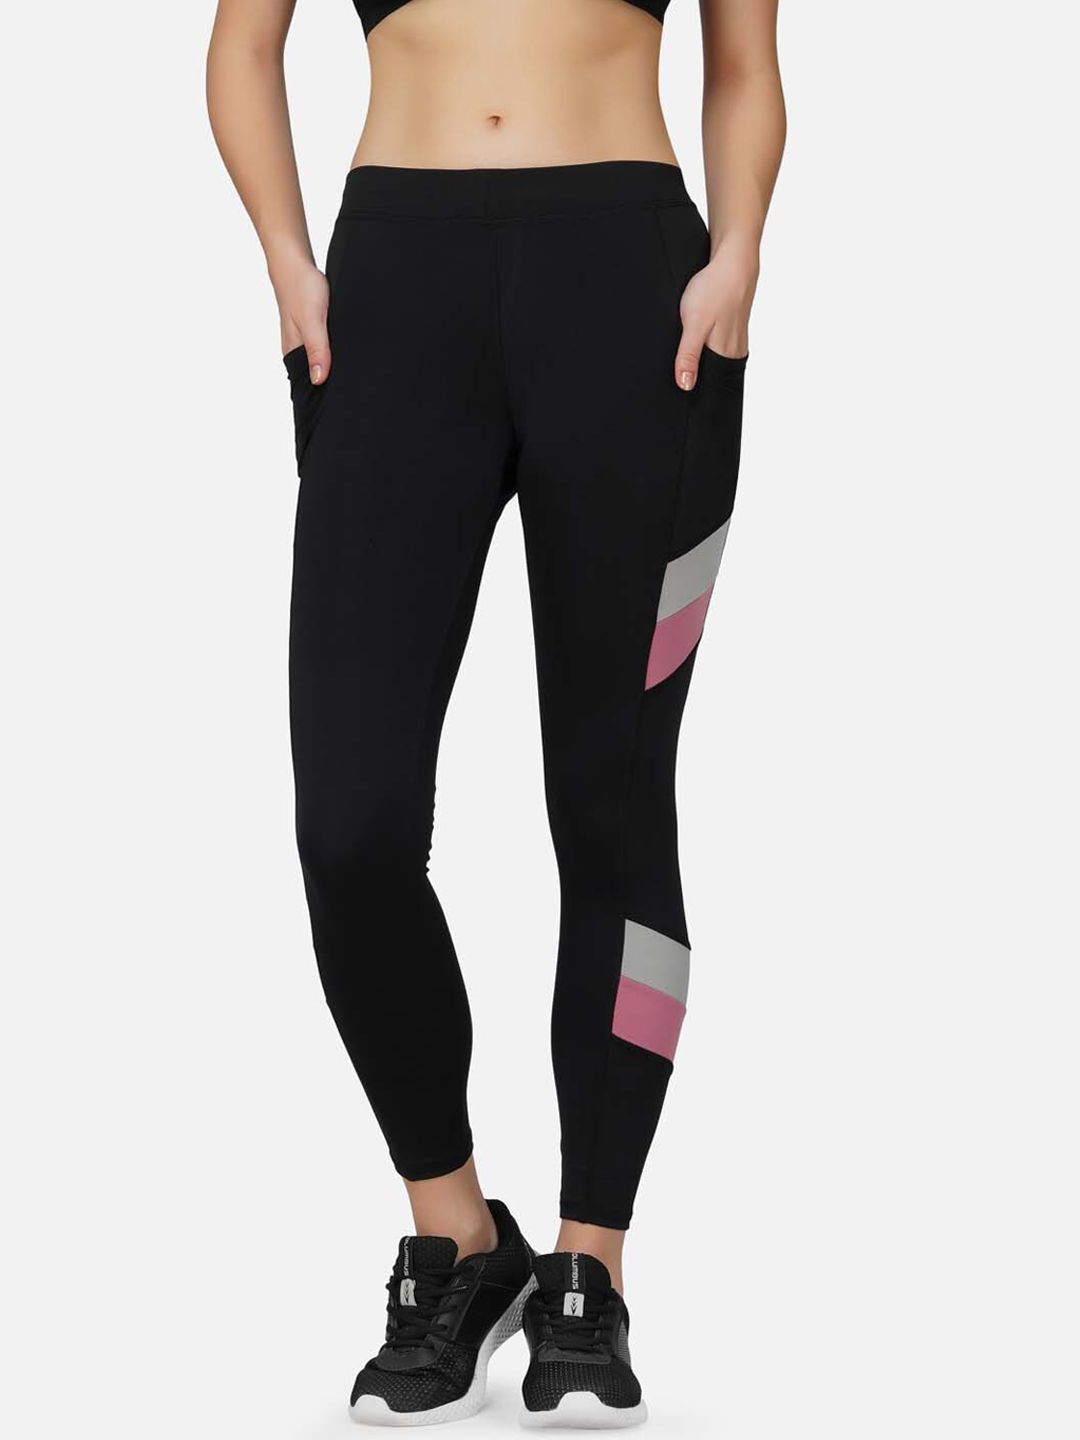 IMPERATIVE Women Black Solid Slim Fit Mid-Rise Dry Fit Yoga Tights with Side Striped Price in India